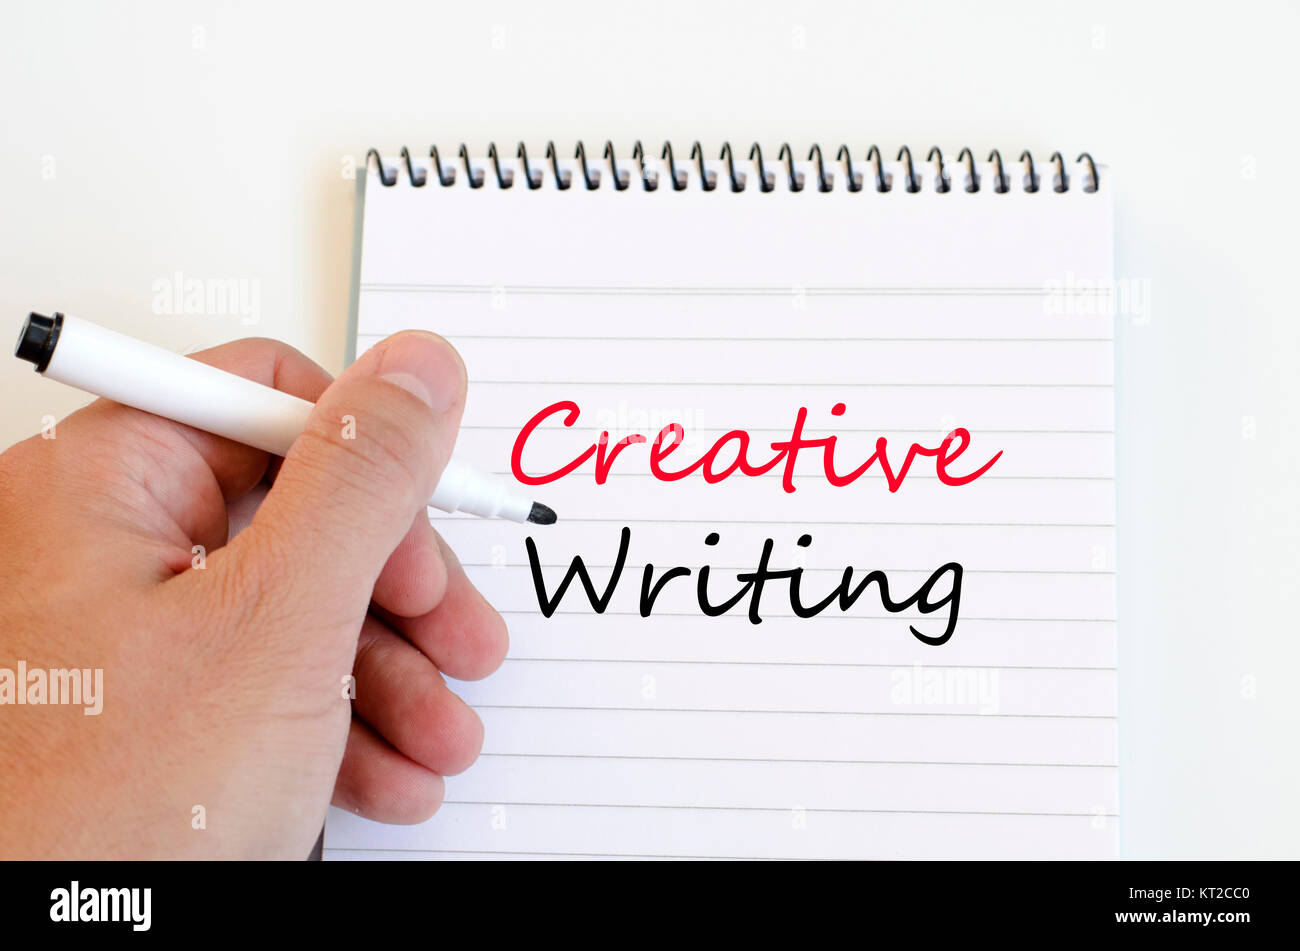 Creative writing concept on notebook Stock Photo